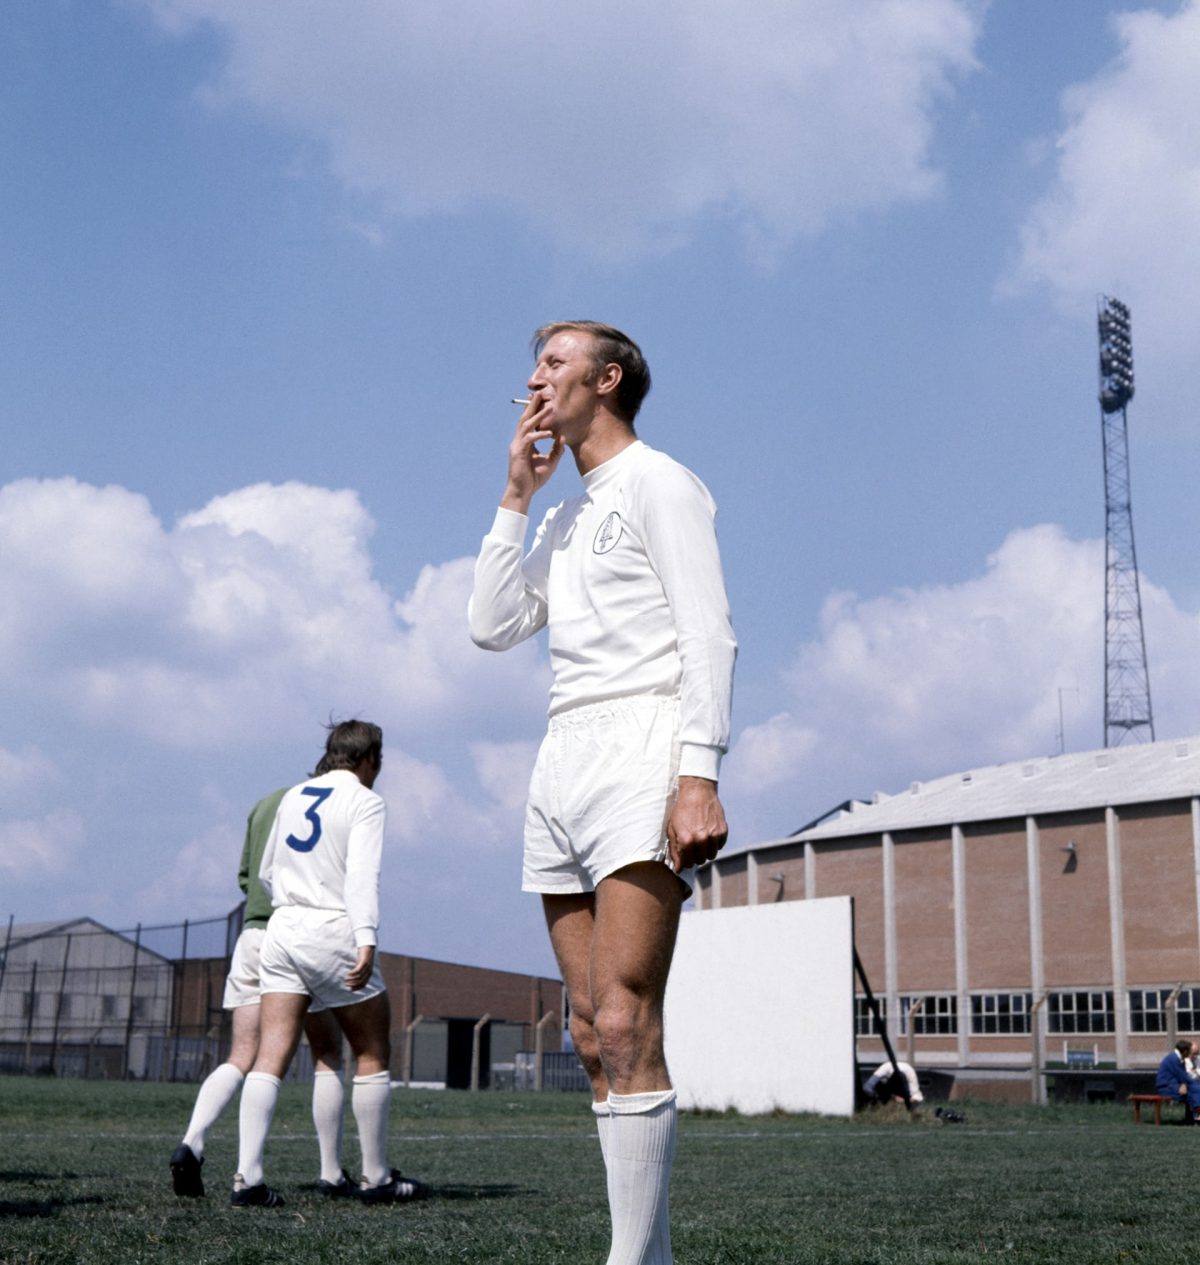 Leeds United’s Jack Charlton smoking a cigarette during a training session, August 1970. Mirrorpix